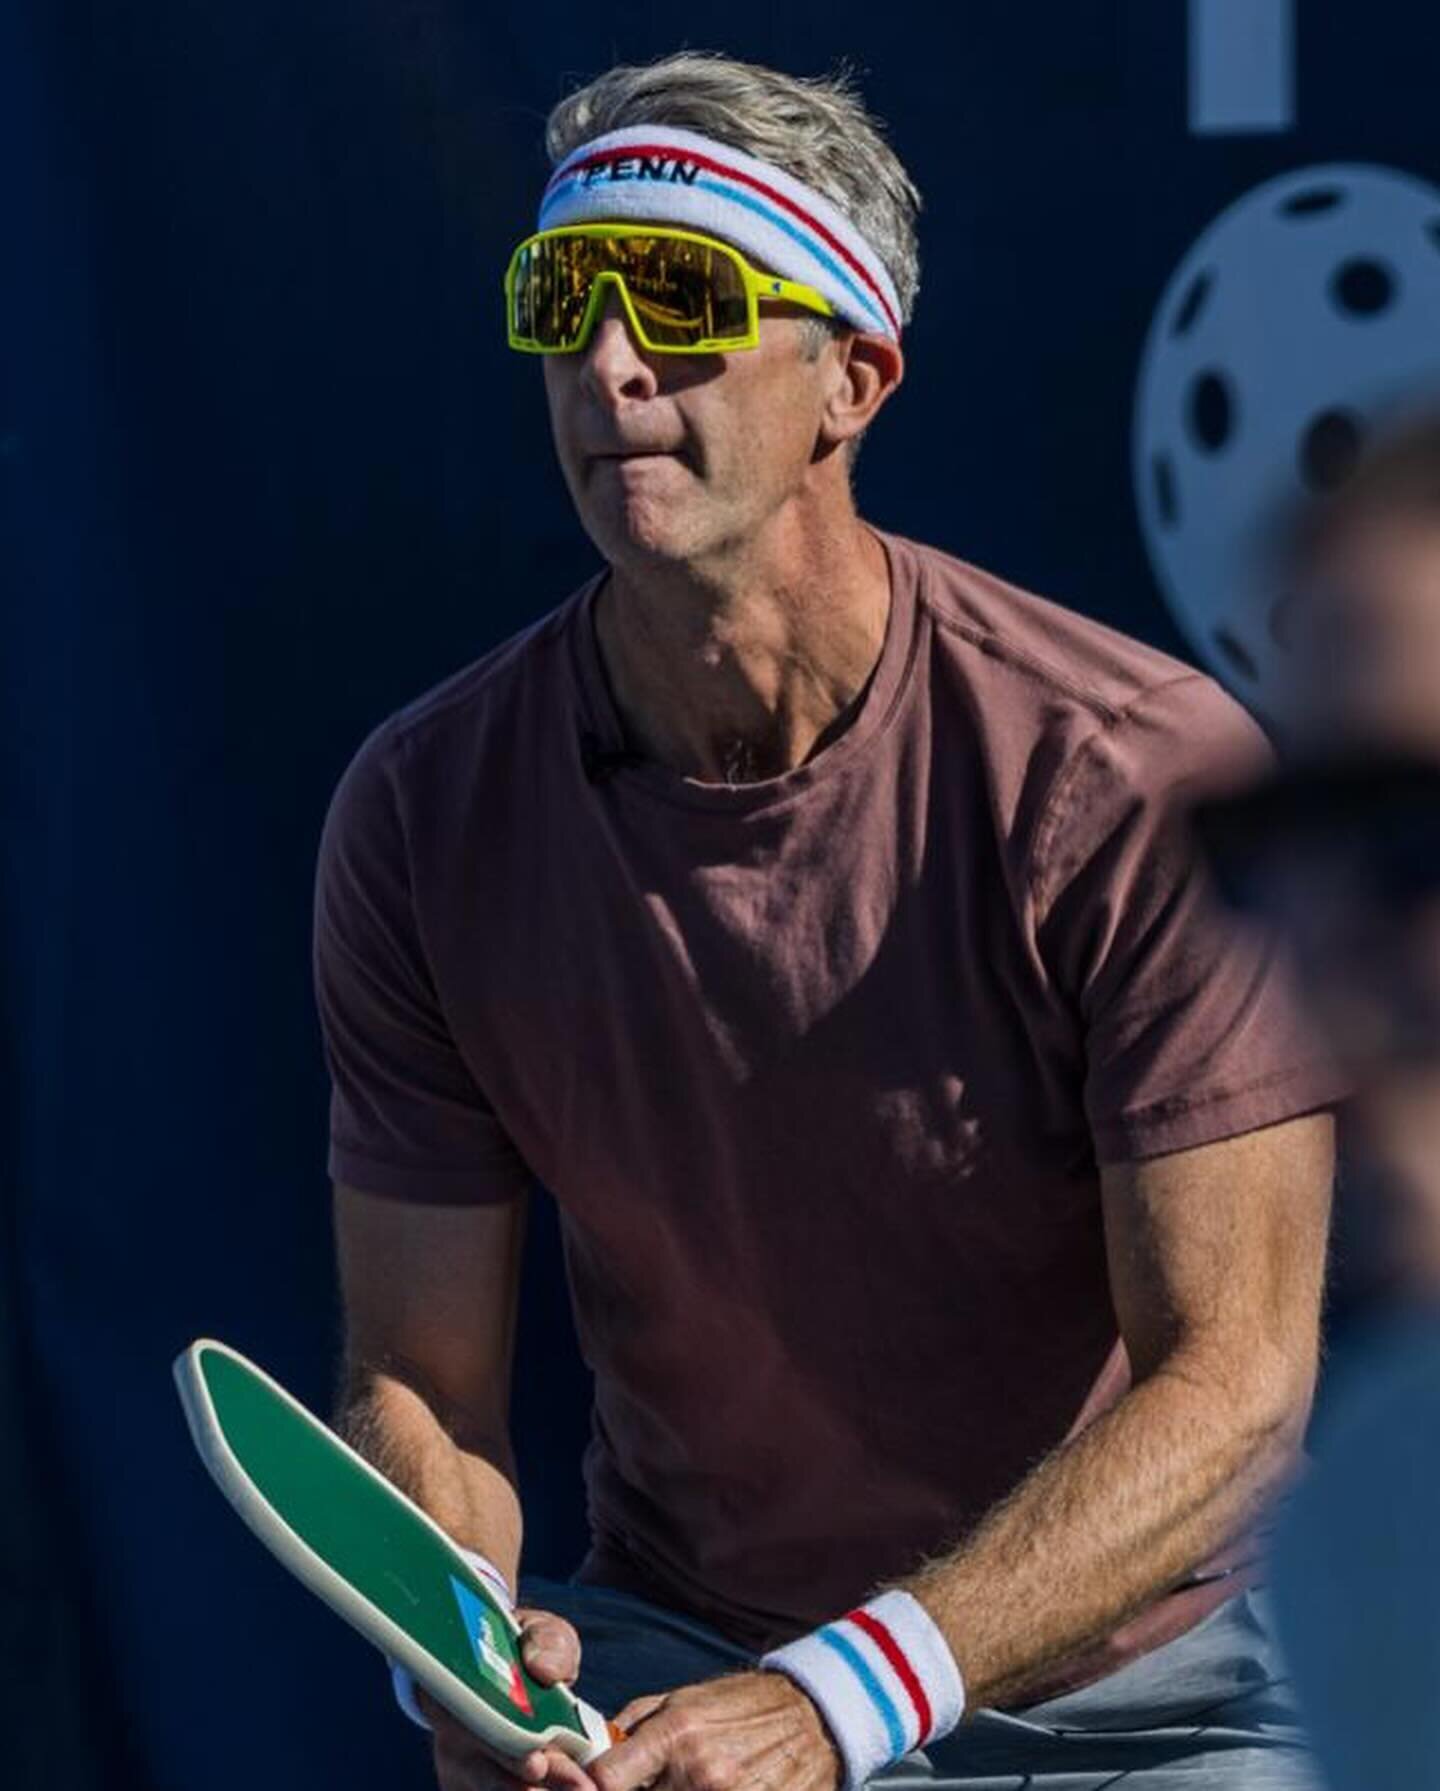 Did I ever mention that shooting @theholdernessfamily getting deep fried by @rafahewettpb &amp; @christa_gecheva at @majorleaguepb  Dallas was an absolute blast? 
I forgot til now. 
My bad. 
Here ya go. 
.
.
.
#pickleball #pickleballislife  #sportsph